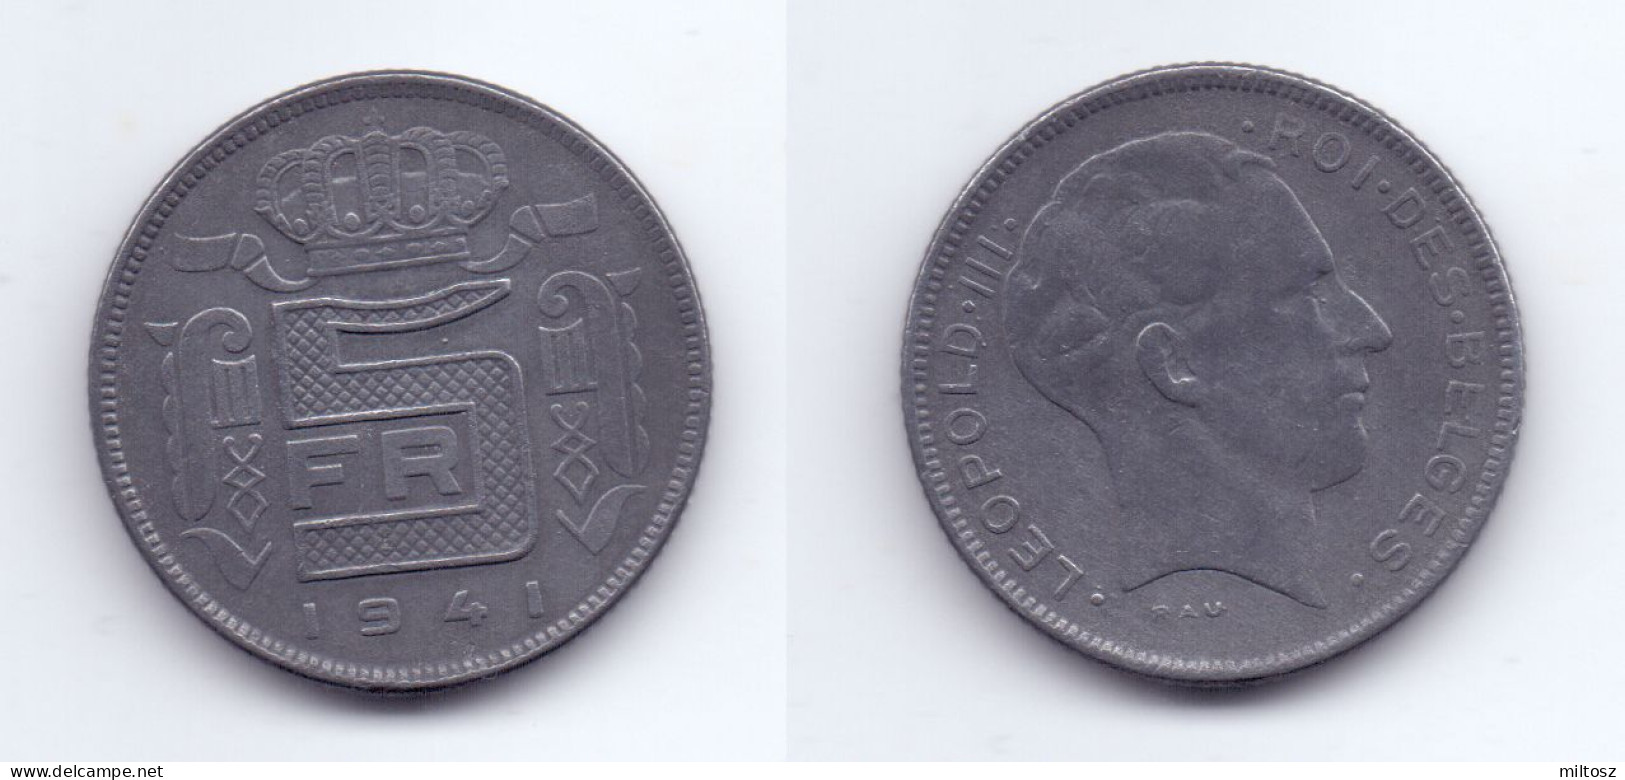 Belgium 5 Francs 1941 WWII Issue (French Legend) - 5 Francs